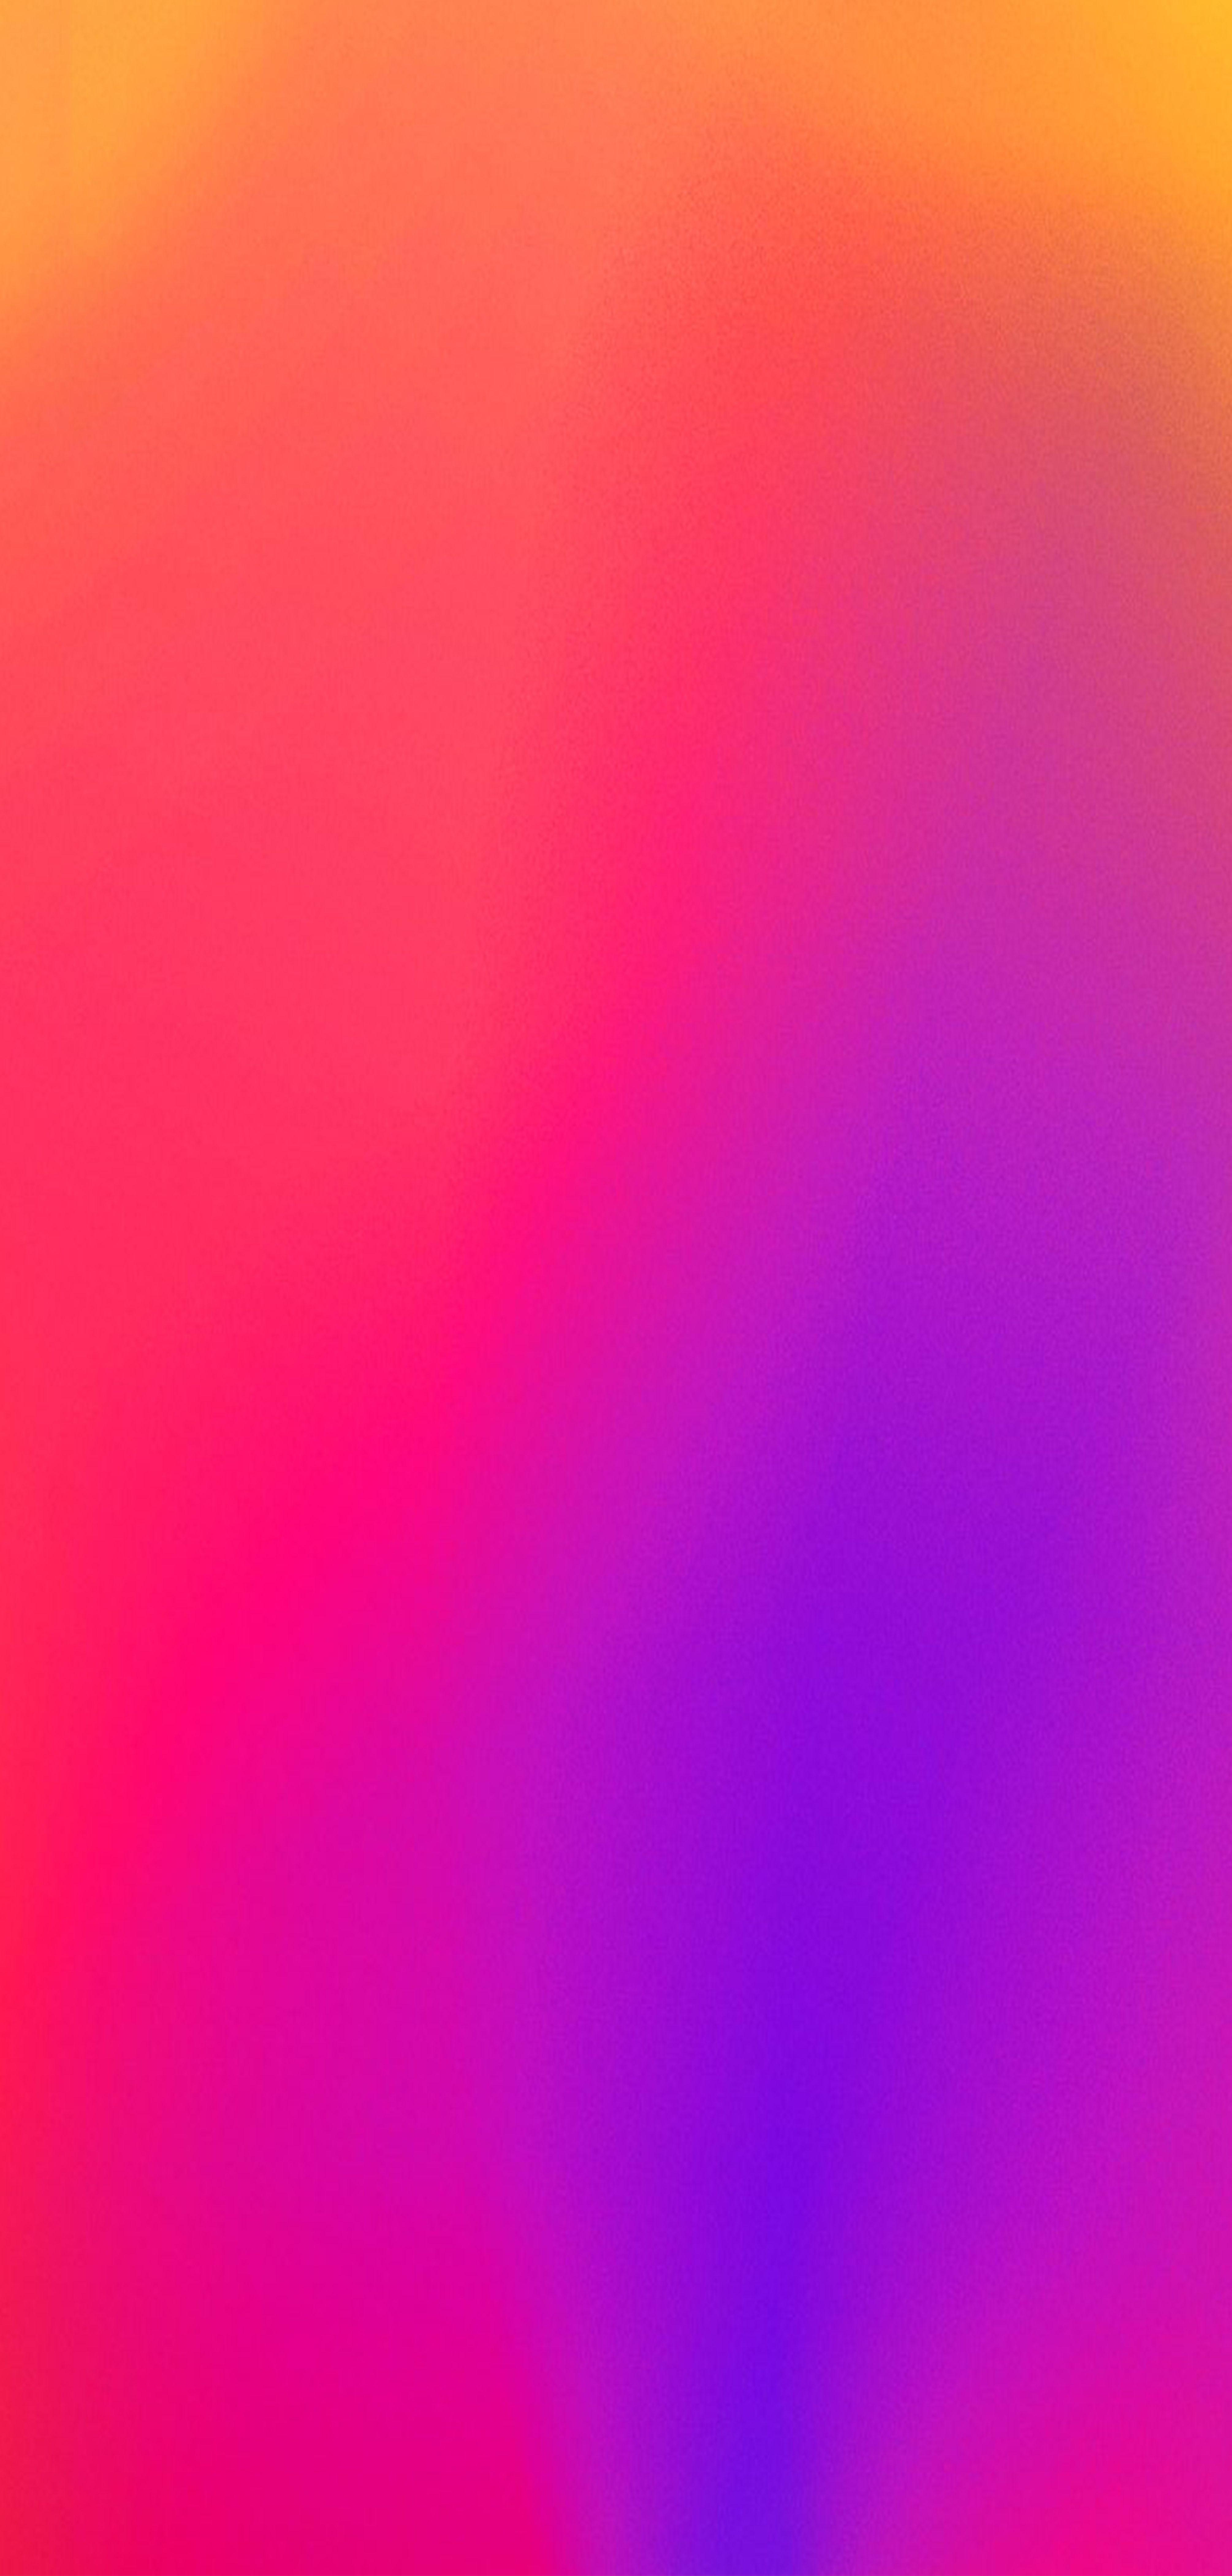 iPhone and Android Wallpaper: Vibrant Shapes & Gradients